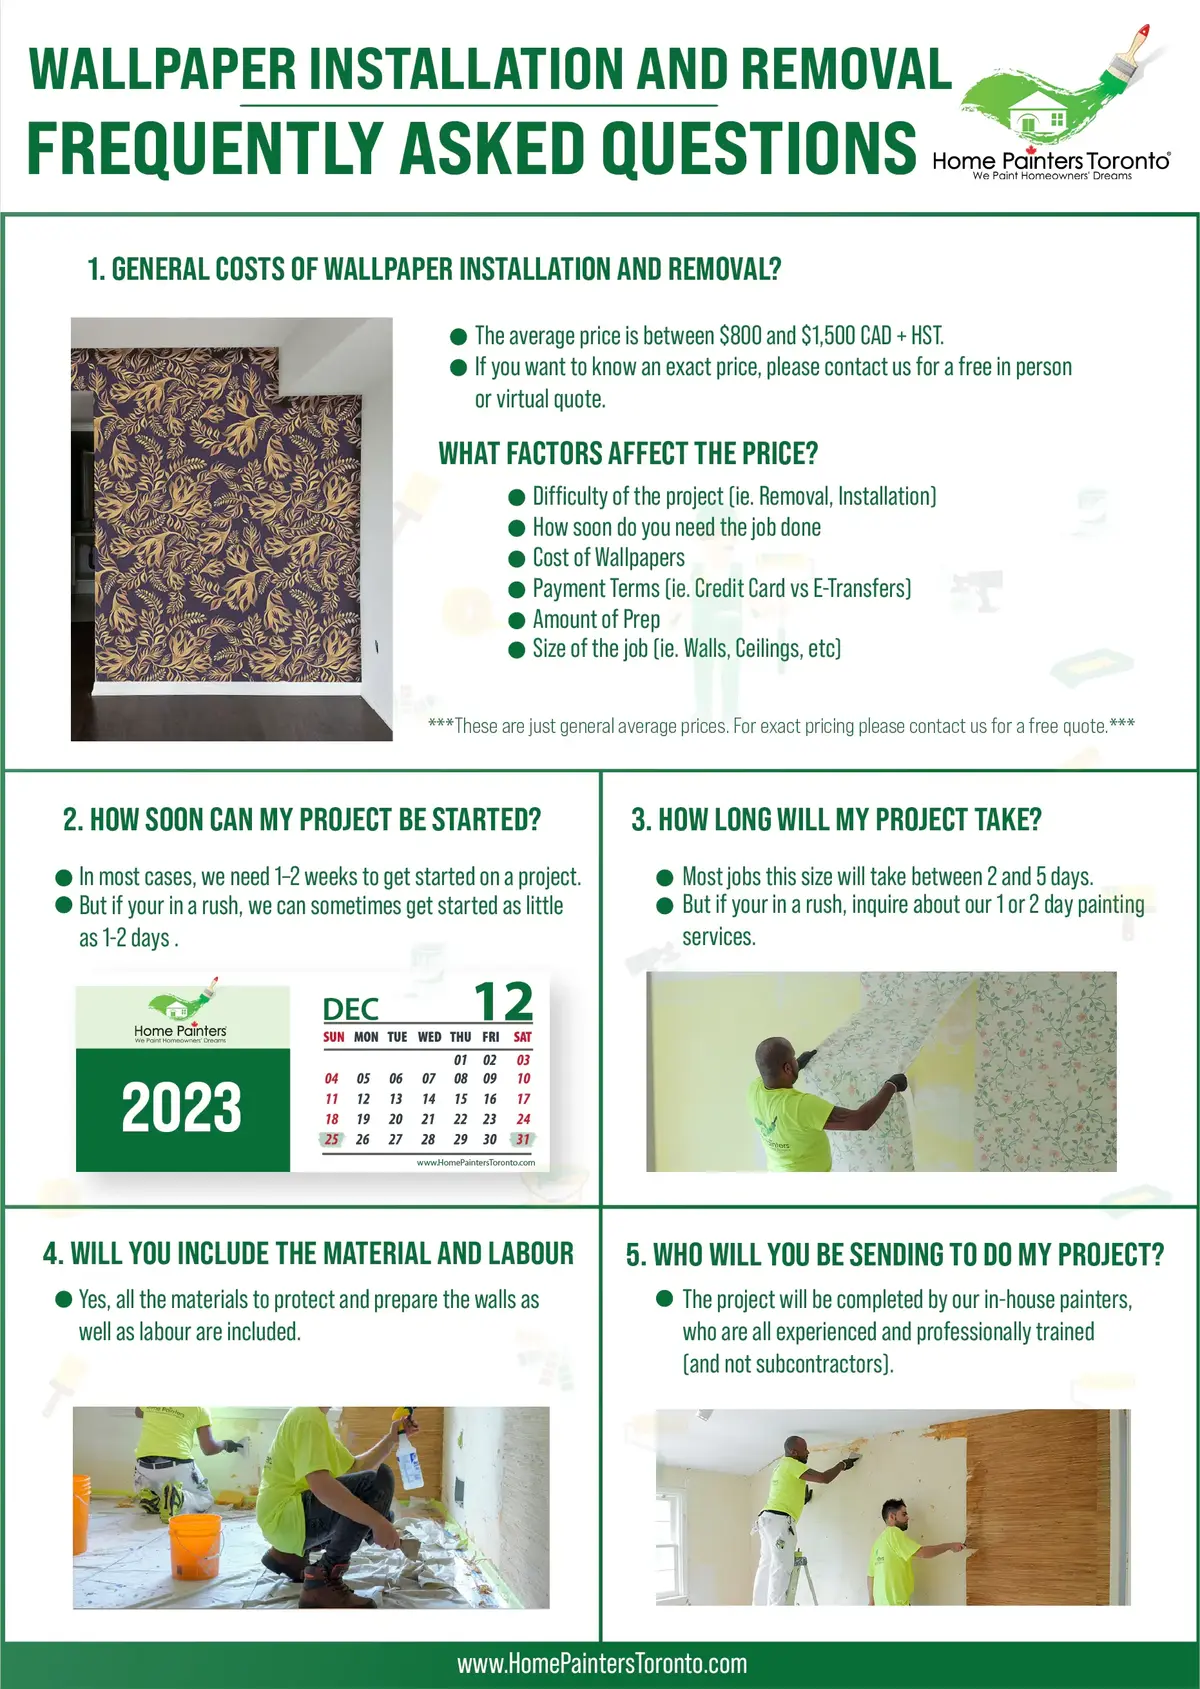 Wallpaper Installation and Removal Infographic